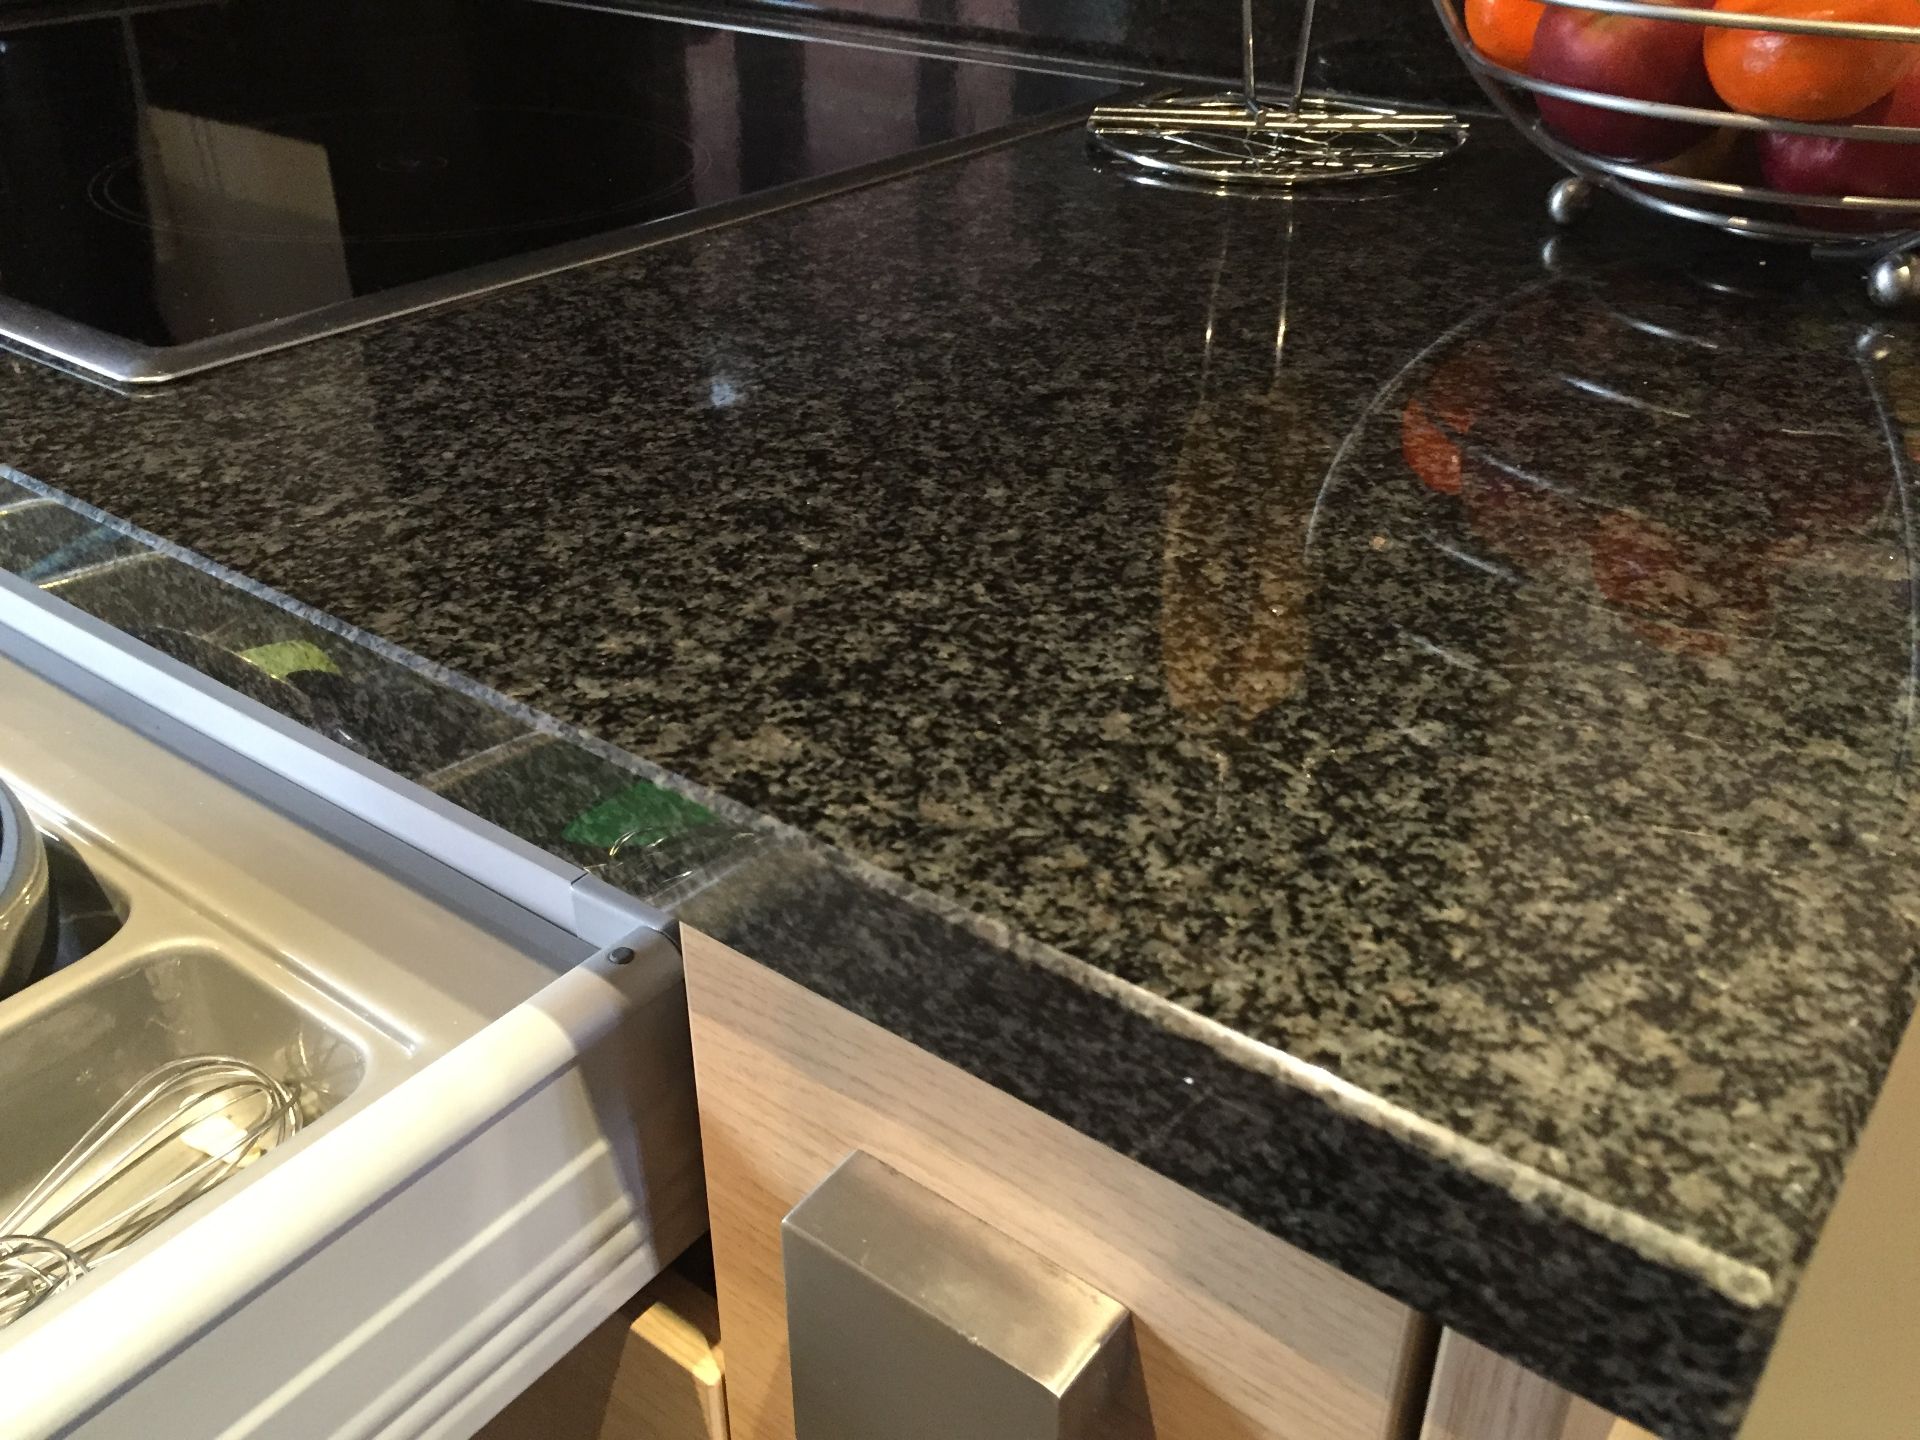 1 x Quality Hacker Kitchen With Neff Appliances And Black Granite worktop surfaces - Presented In - Image 16 of 41